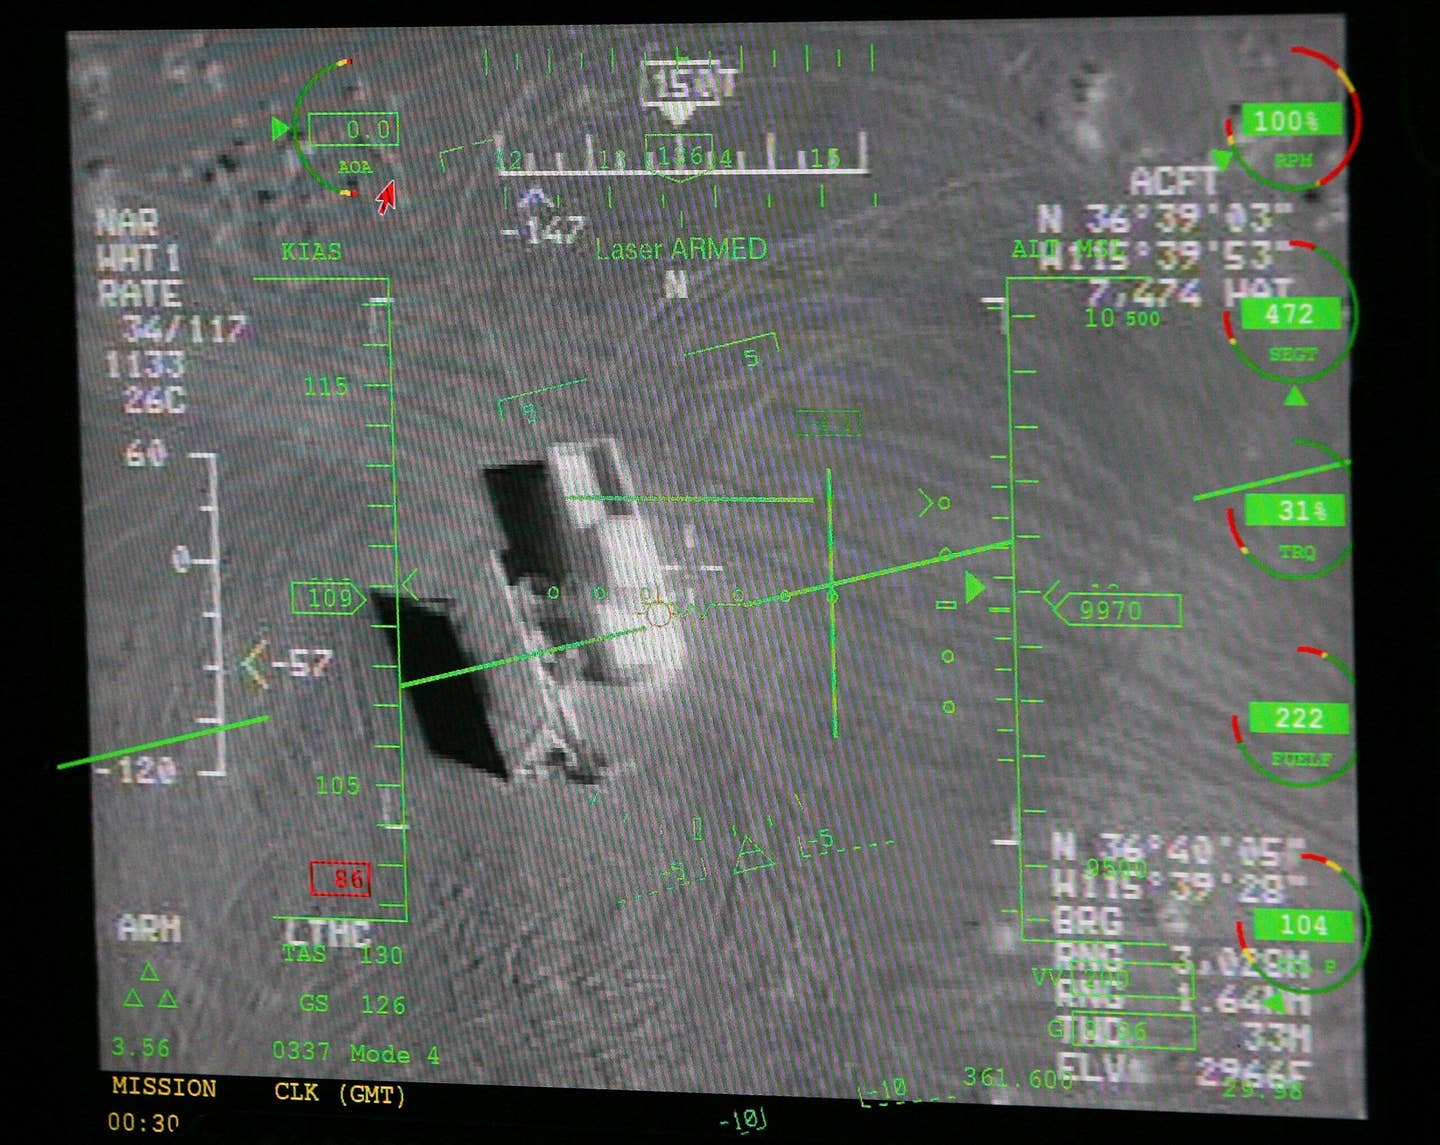 A pilot's display in a ground control station shows a truck from the view of a camera on an MQ-9 Reaper during a training mission on August 8, 2007, at Creech Air Force Base in Indian Springs, Nevada. <em>Credit: Photo by Ethan Miller/Getty Images</em>